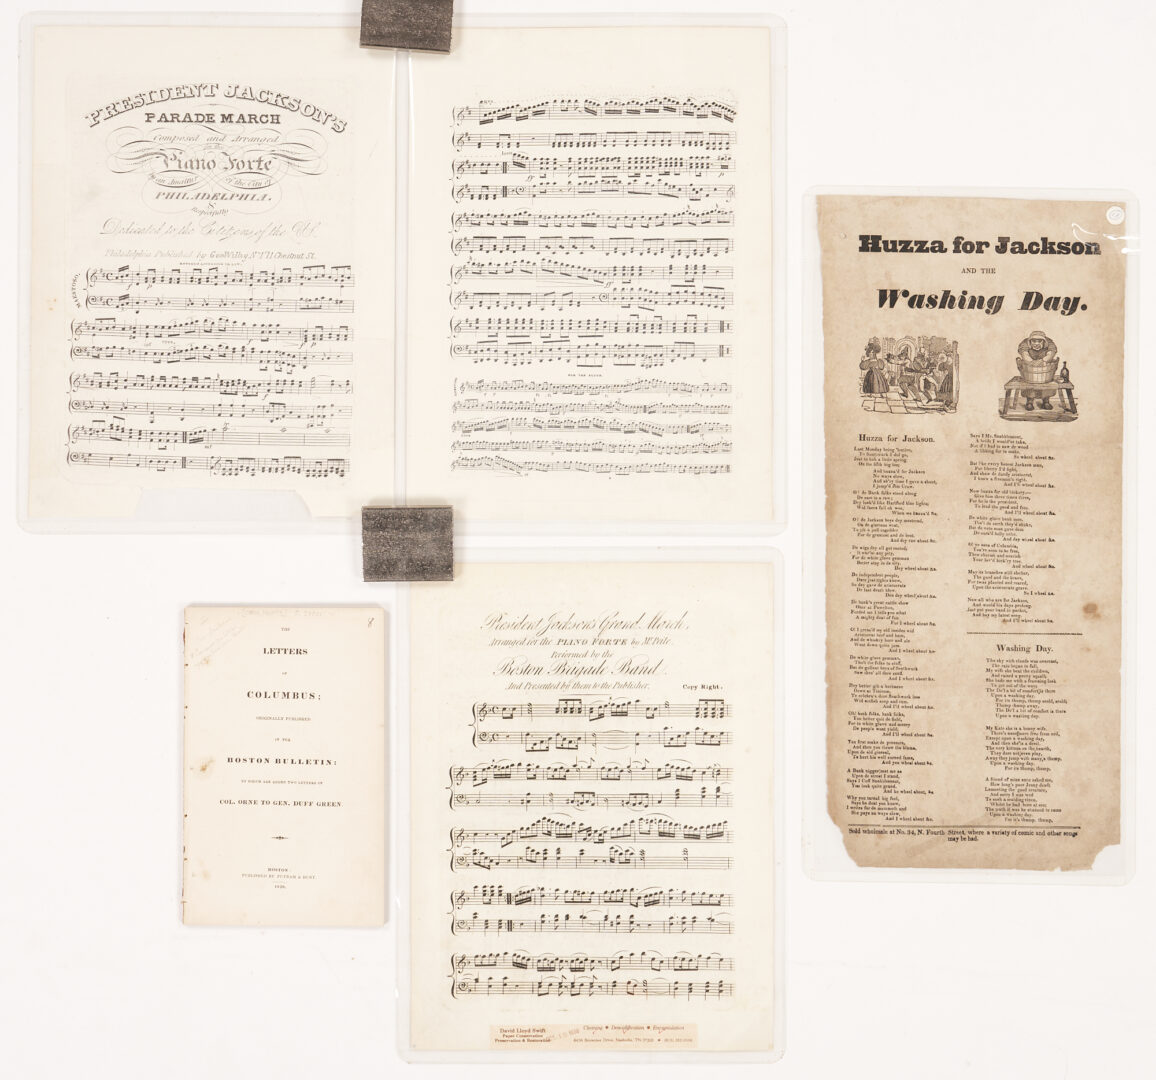 Lot 573: President Andrew Jackson Sheet Music, Broadside and Pamphlet, 4 items